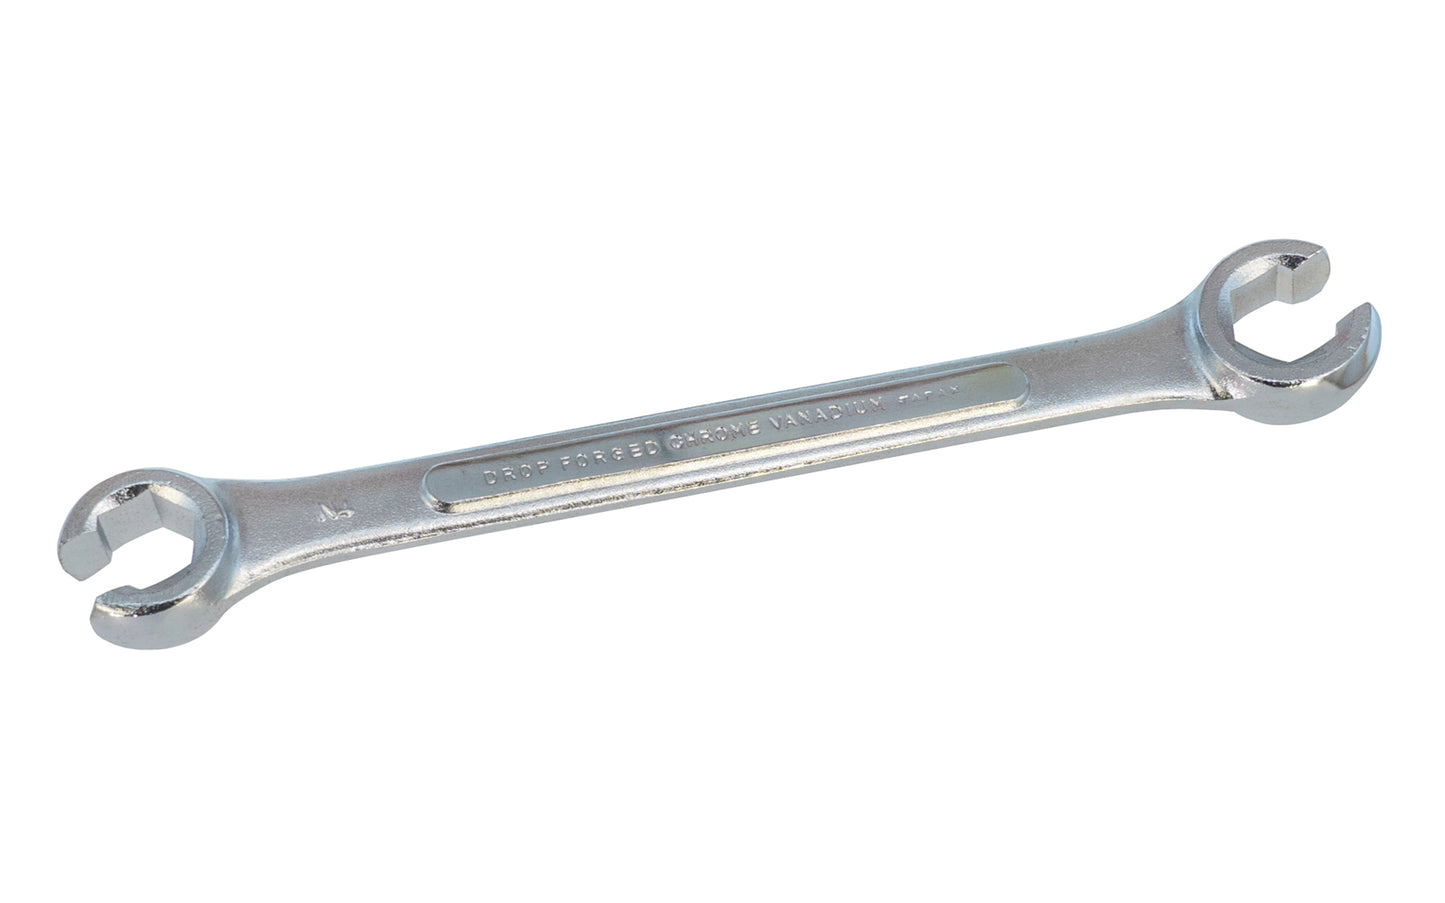 Japanese Flare Nut Wrench - Chrome Vanadium Forged Alloy Steel. Made in Japan.